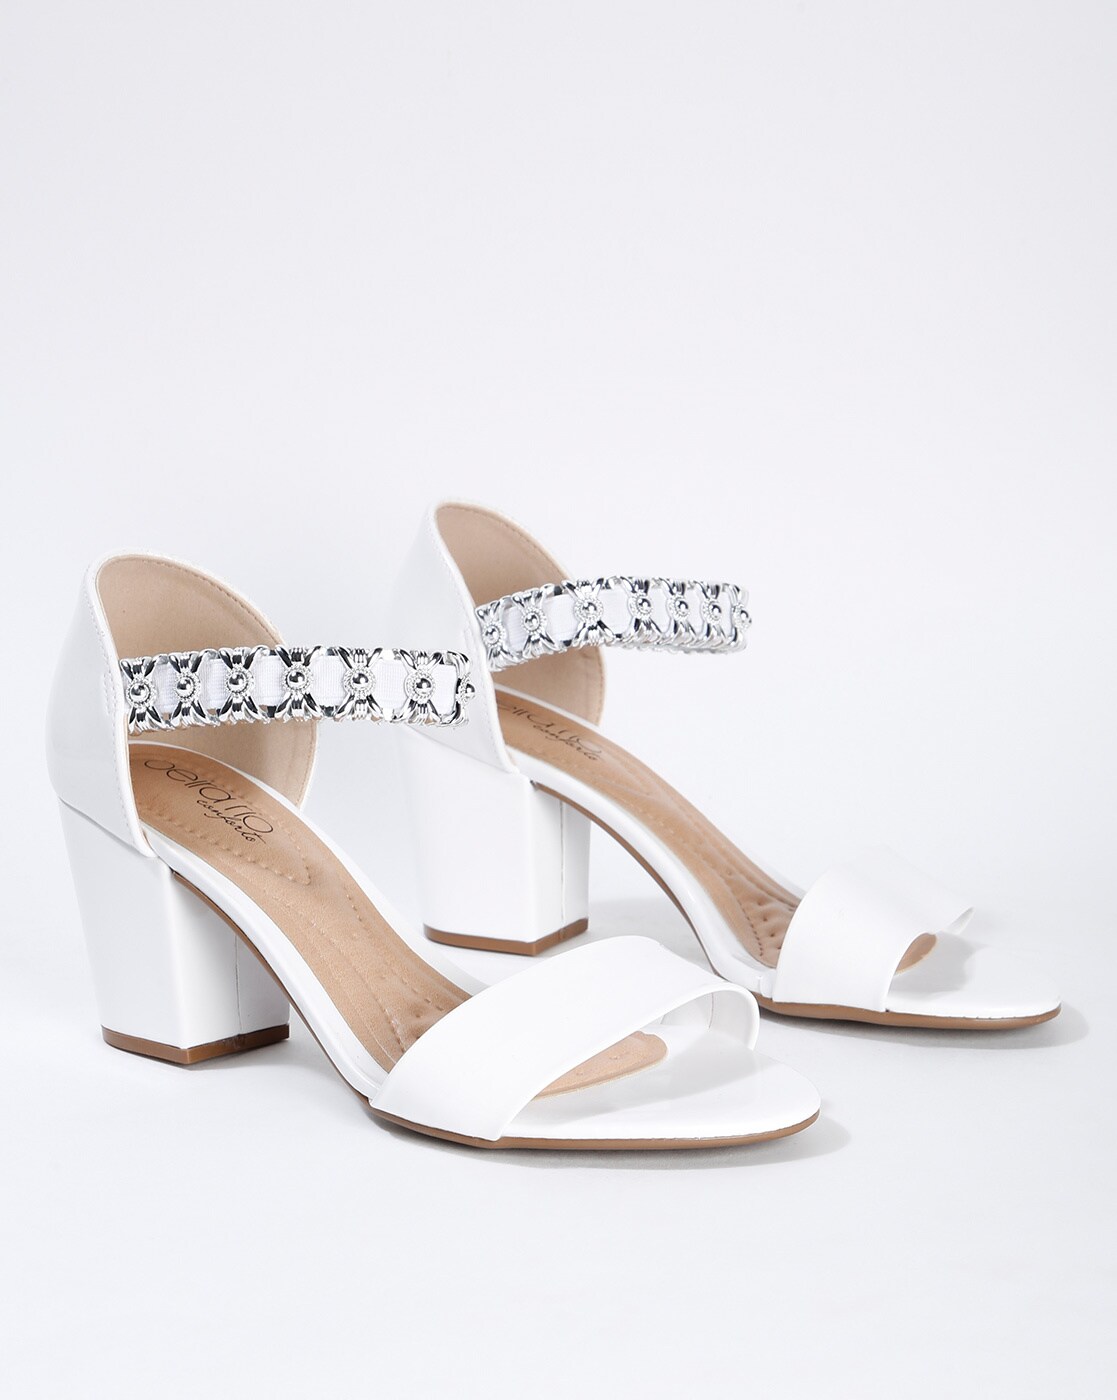 Heeled Sandals for Women by BEIRA RIO 